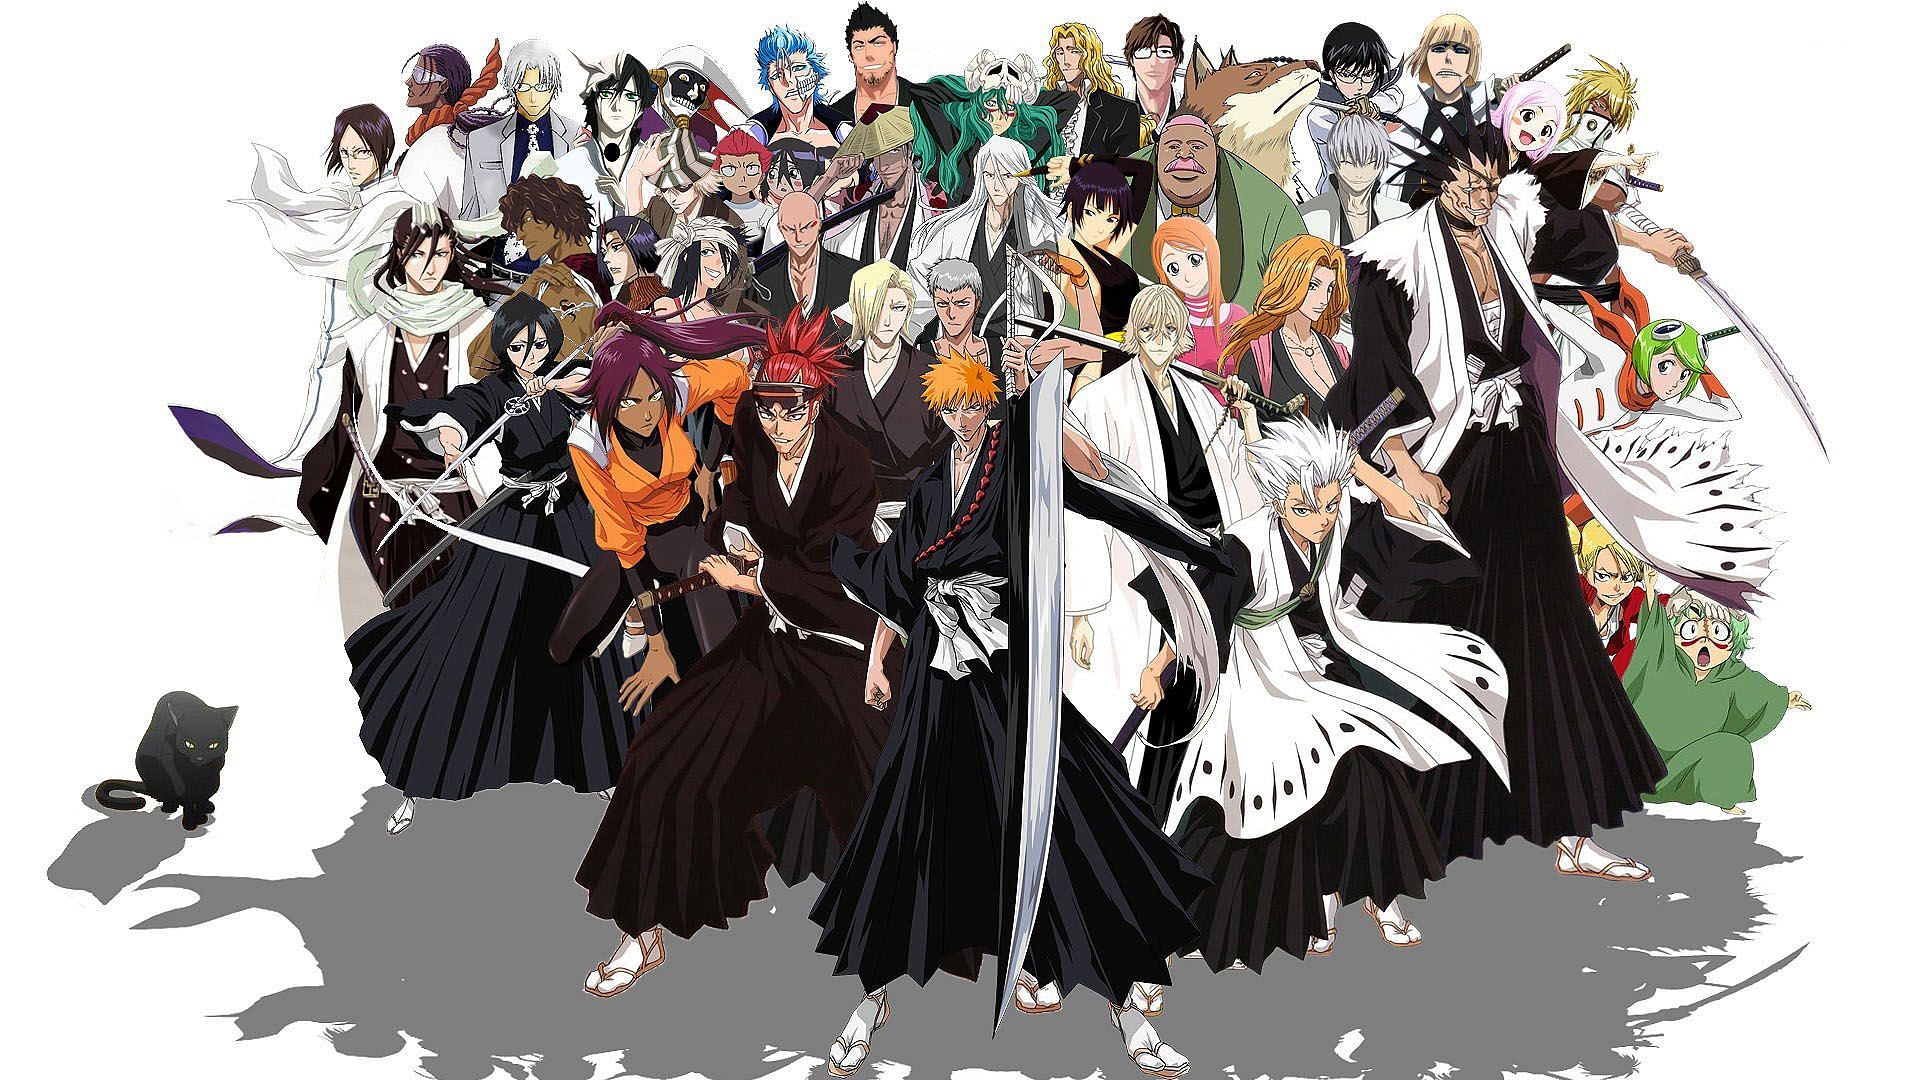 The Big Three series&#039; wide cast of characters is home to some of the best designs in anime and manga (Image via WordPress)